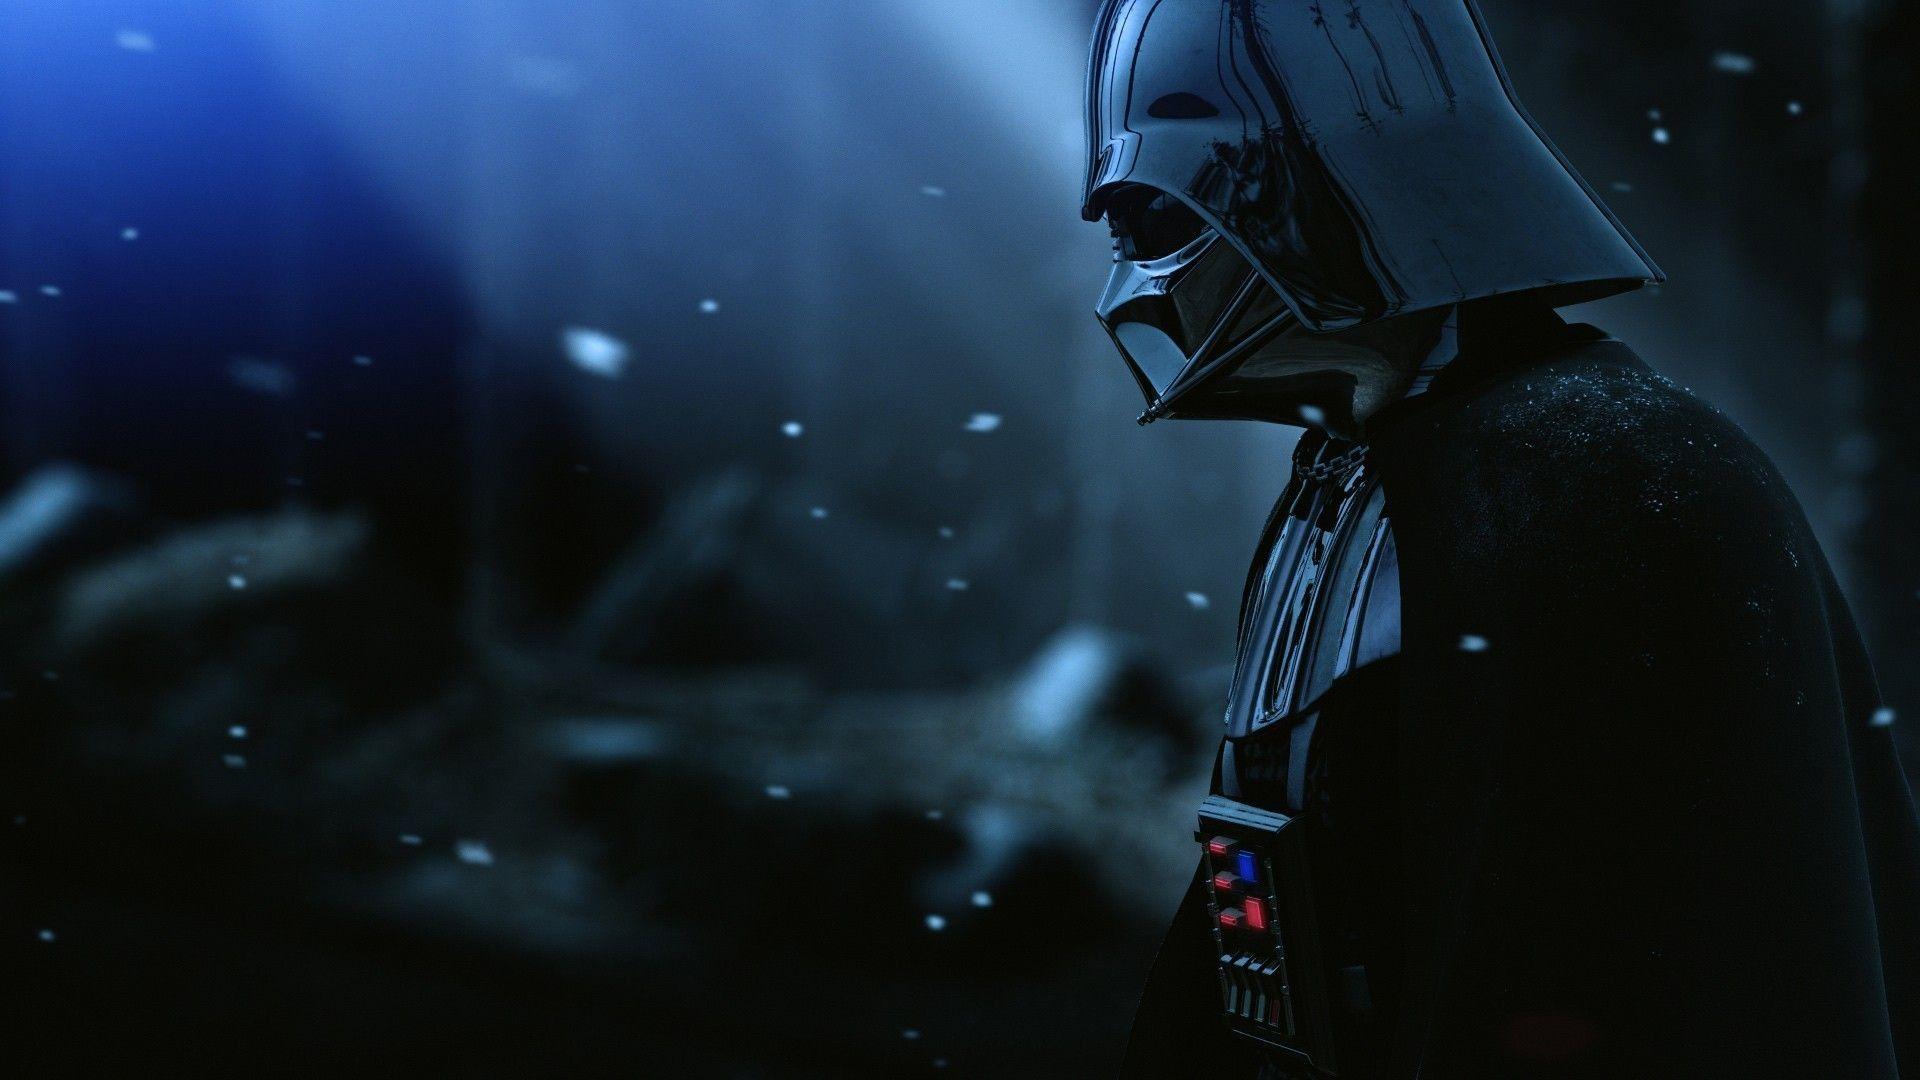 HD Star Wars wallpaperDownload free awesome background